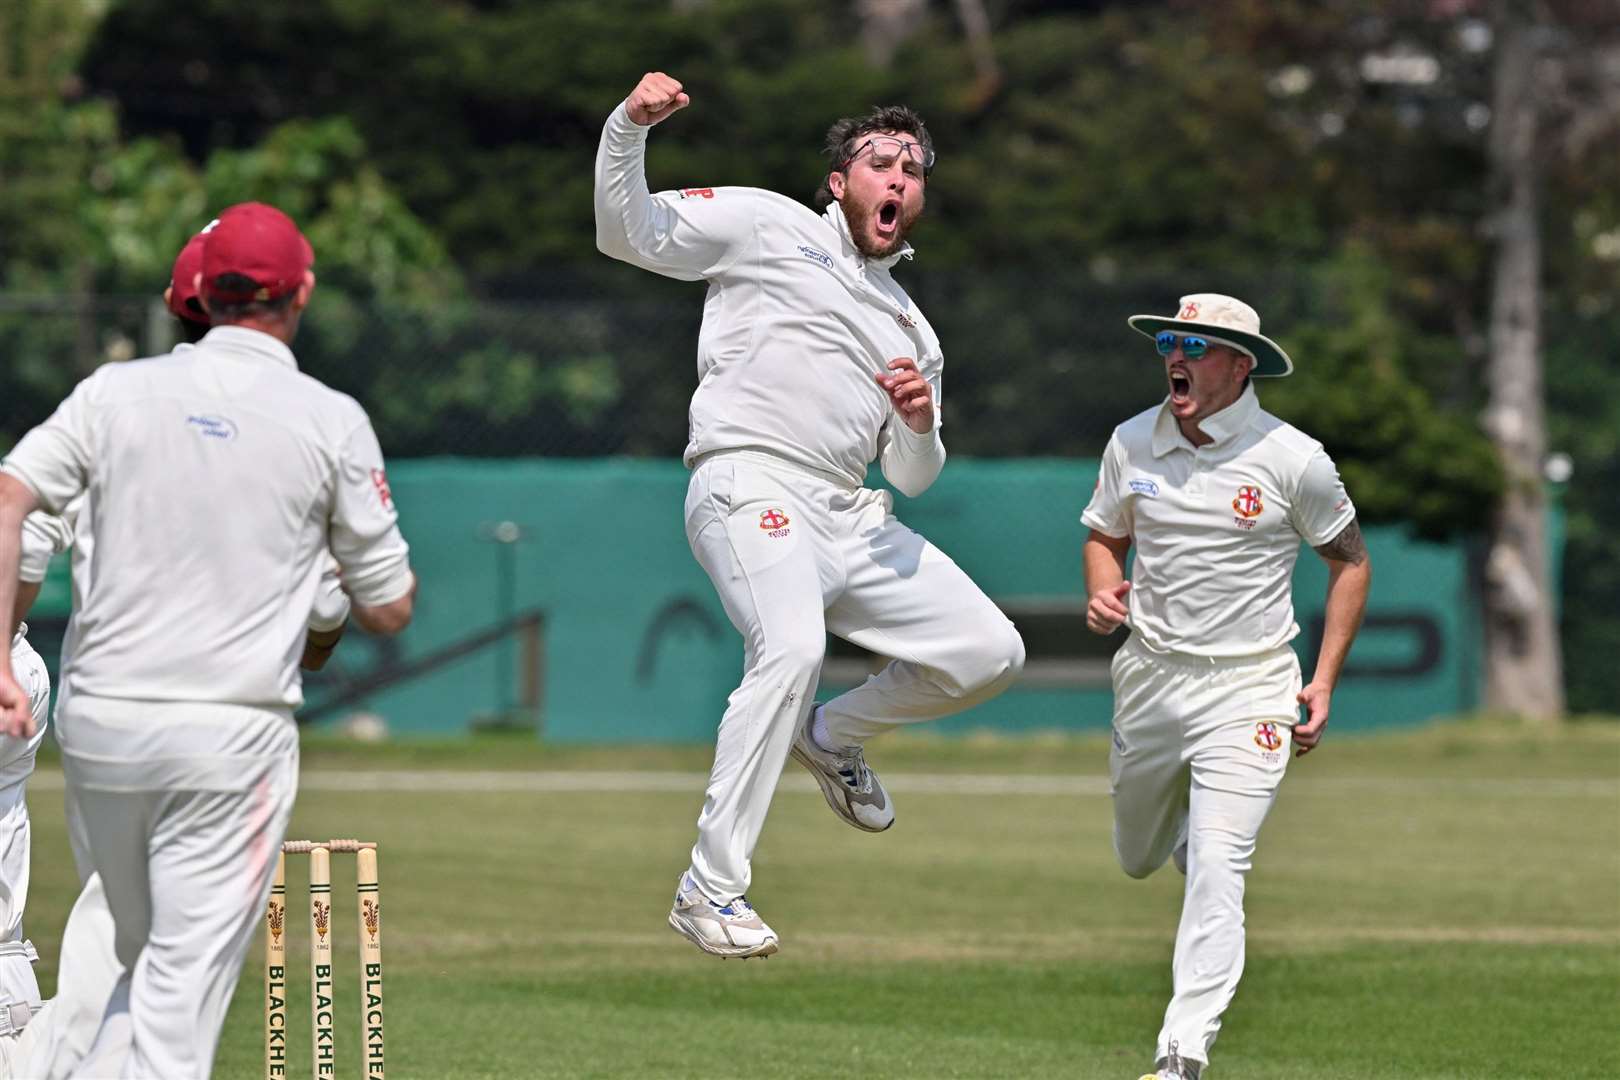 Minster’s Kai Appleby celebrates a wicket on his way to figures of 4-15 during Saturday’s win at Blackheath Picture: Keith Gillard